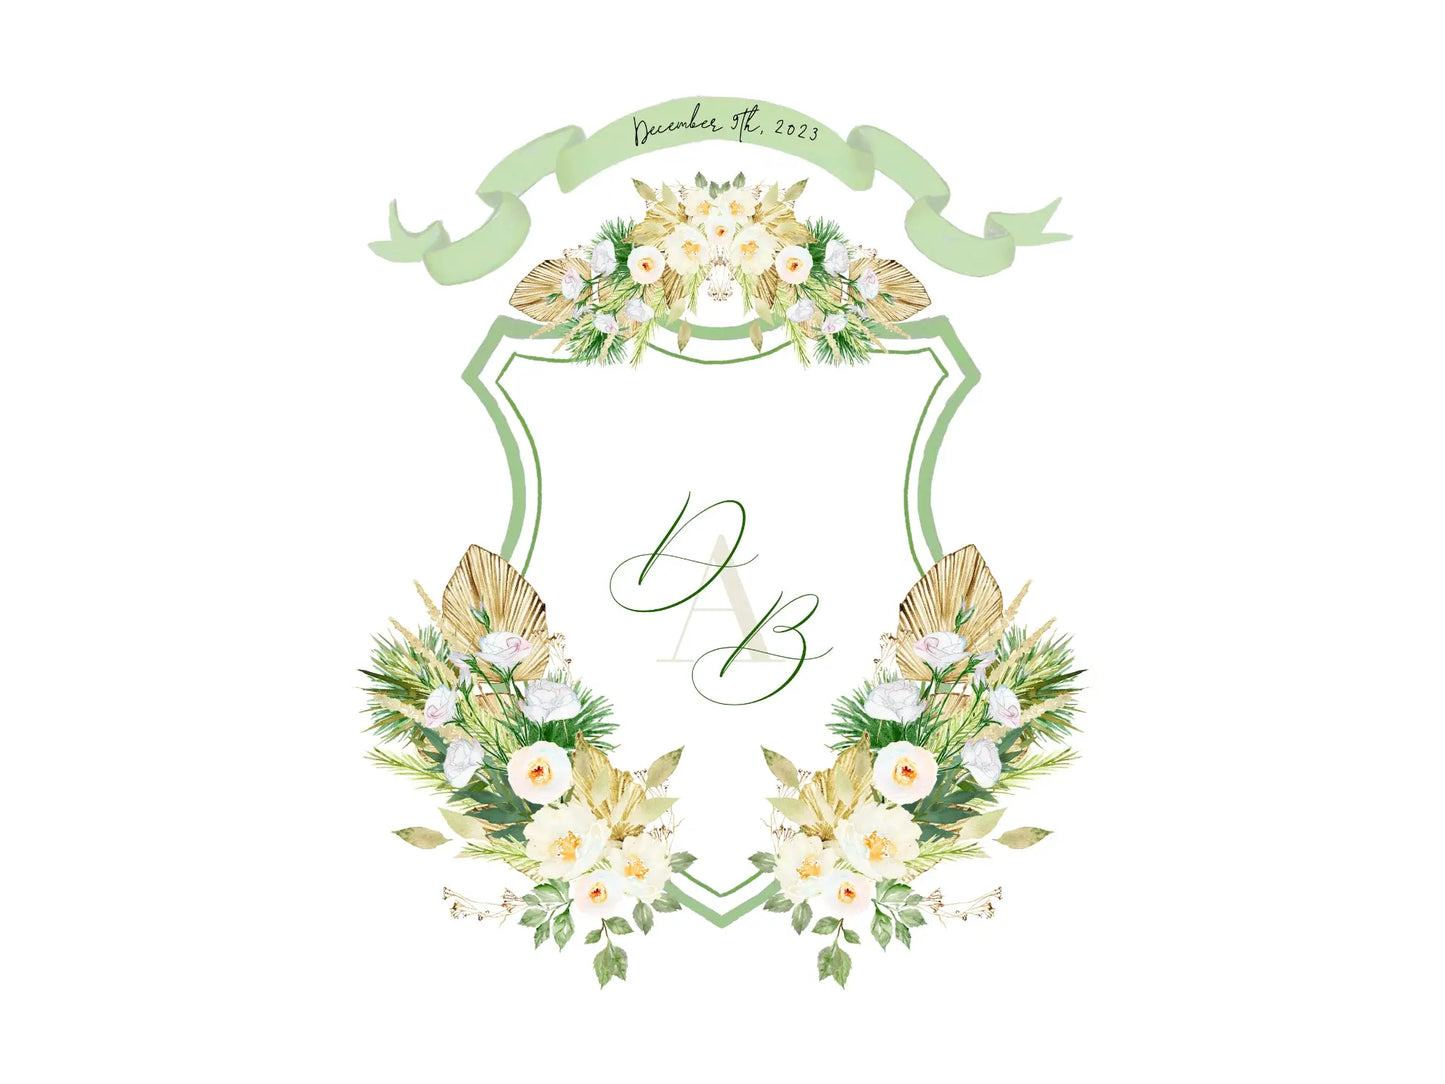 Sage wedding crest with dried palms and watercolor white flowers The Wedding Crest Lab